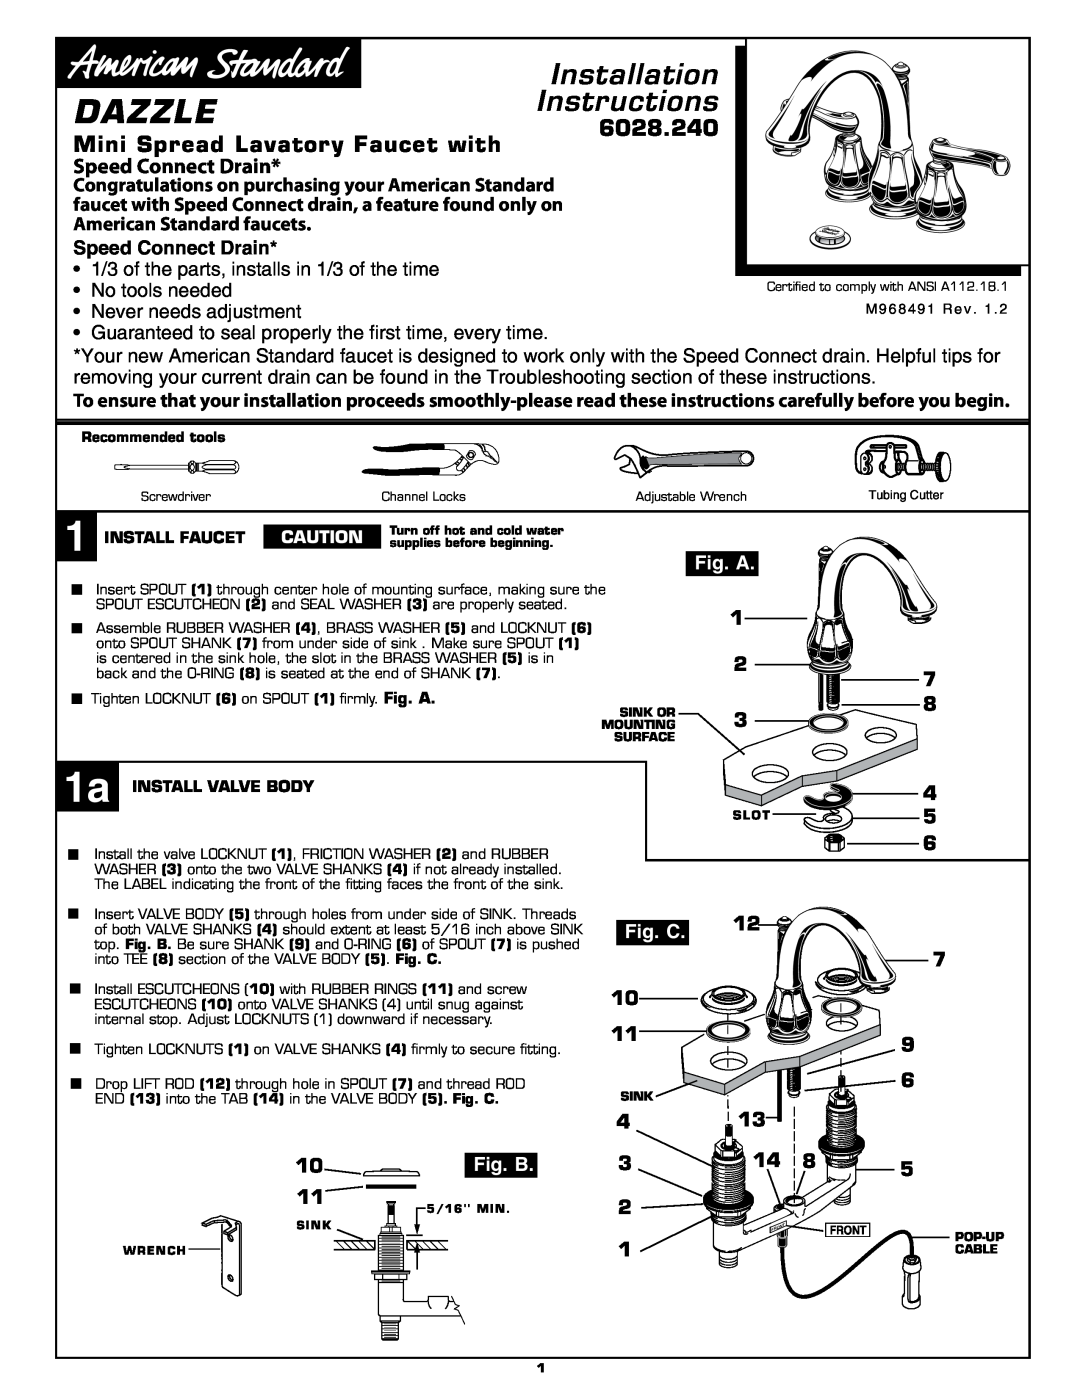 American Standard 6028.240 installation instructions Speed Connect Drain, 7 8 4, Dazzle, Installation, Instructions 